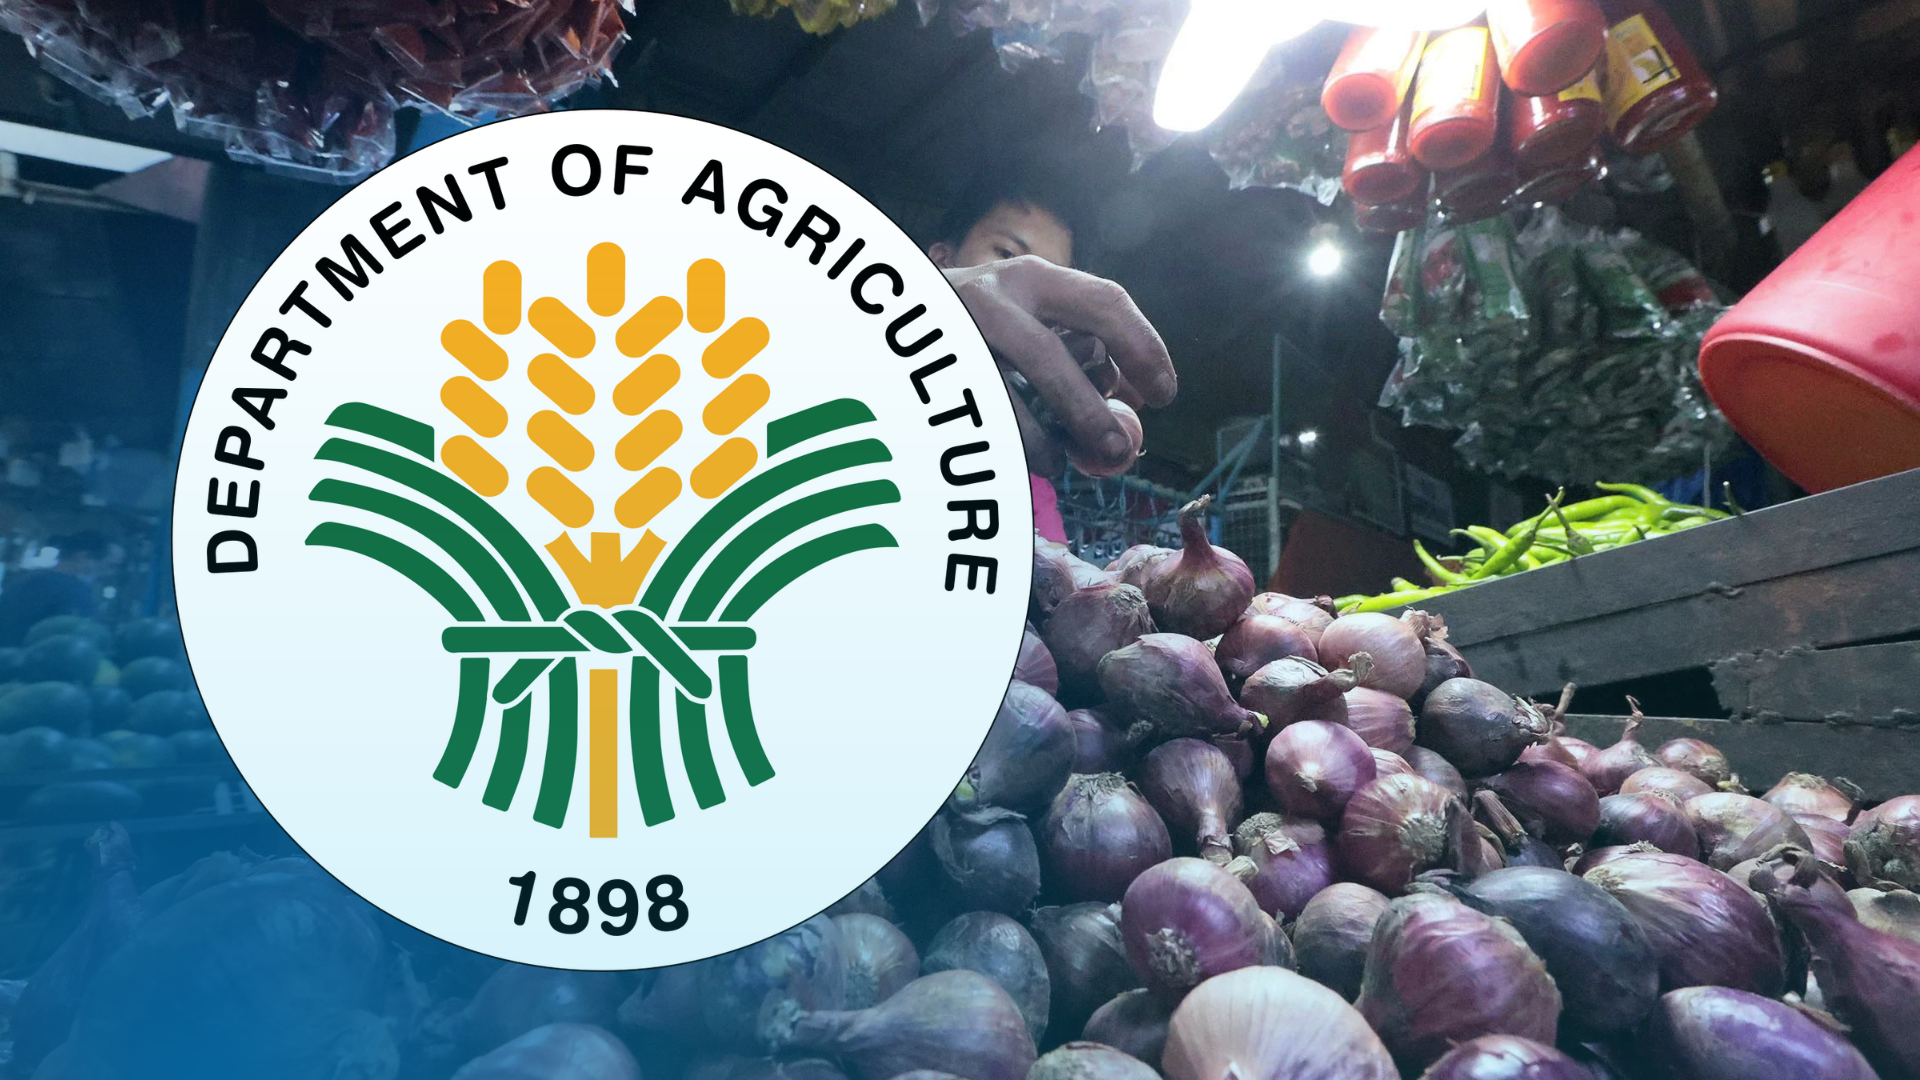 The Department of Agriculture (DA) on Thursday issued an order setting the price of red onion in Metro Manila wet markets at P250 per kilogram (kg) until the first week of January, amid the skyrocketing prices of the agricultural commodity in local stores.